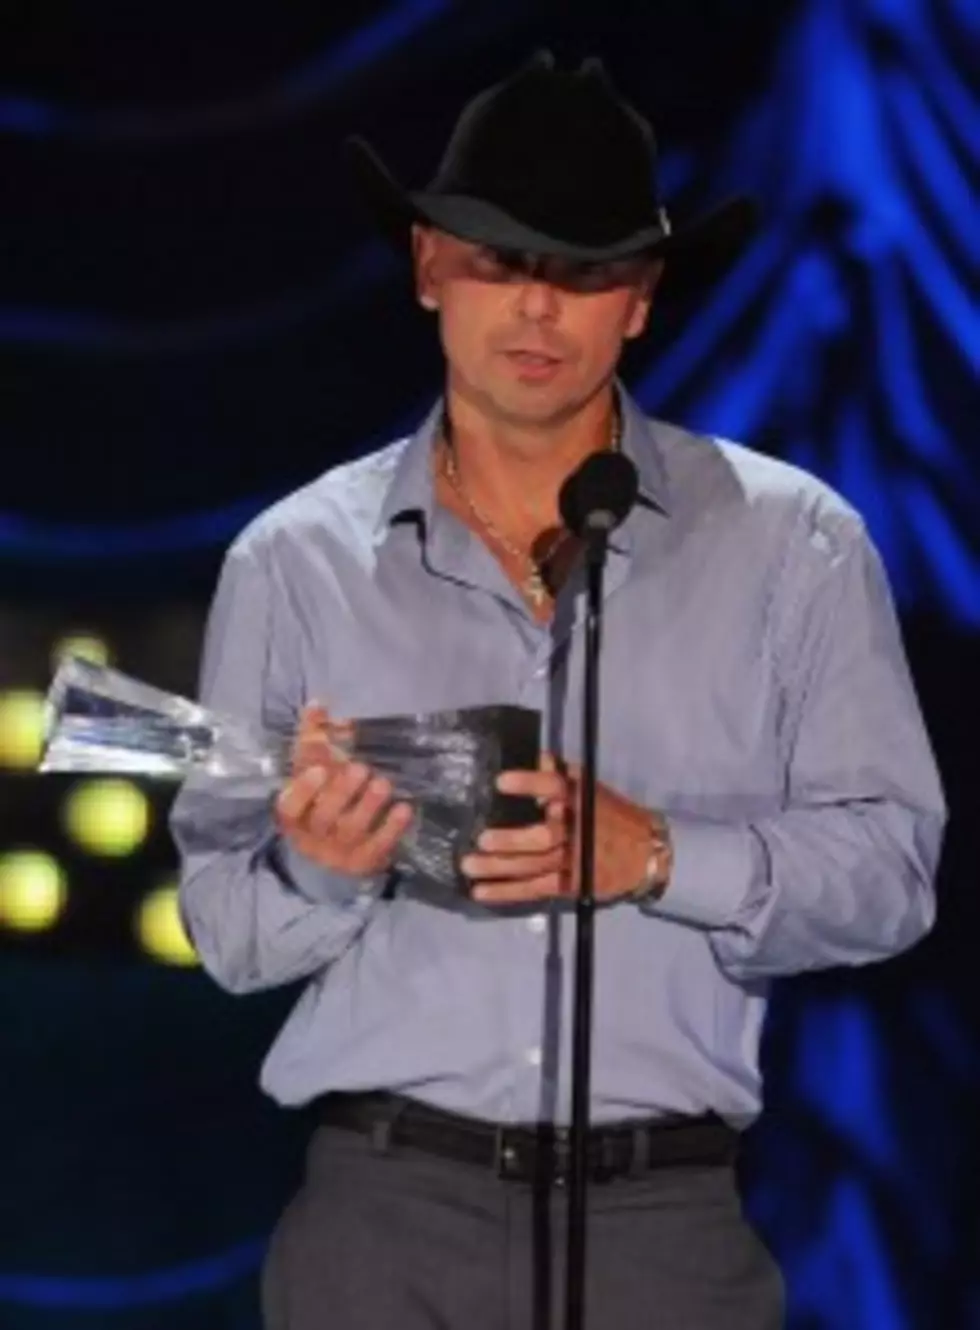 Does Hot Pants Look Like Kenny Chesney? [POLL]